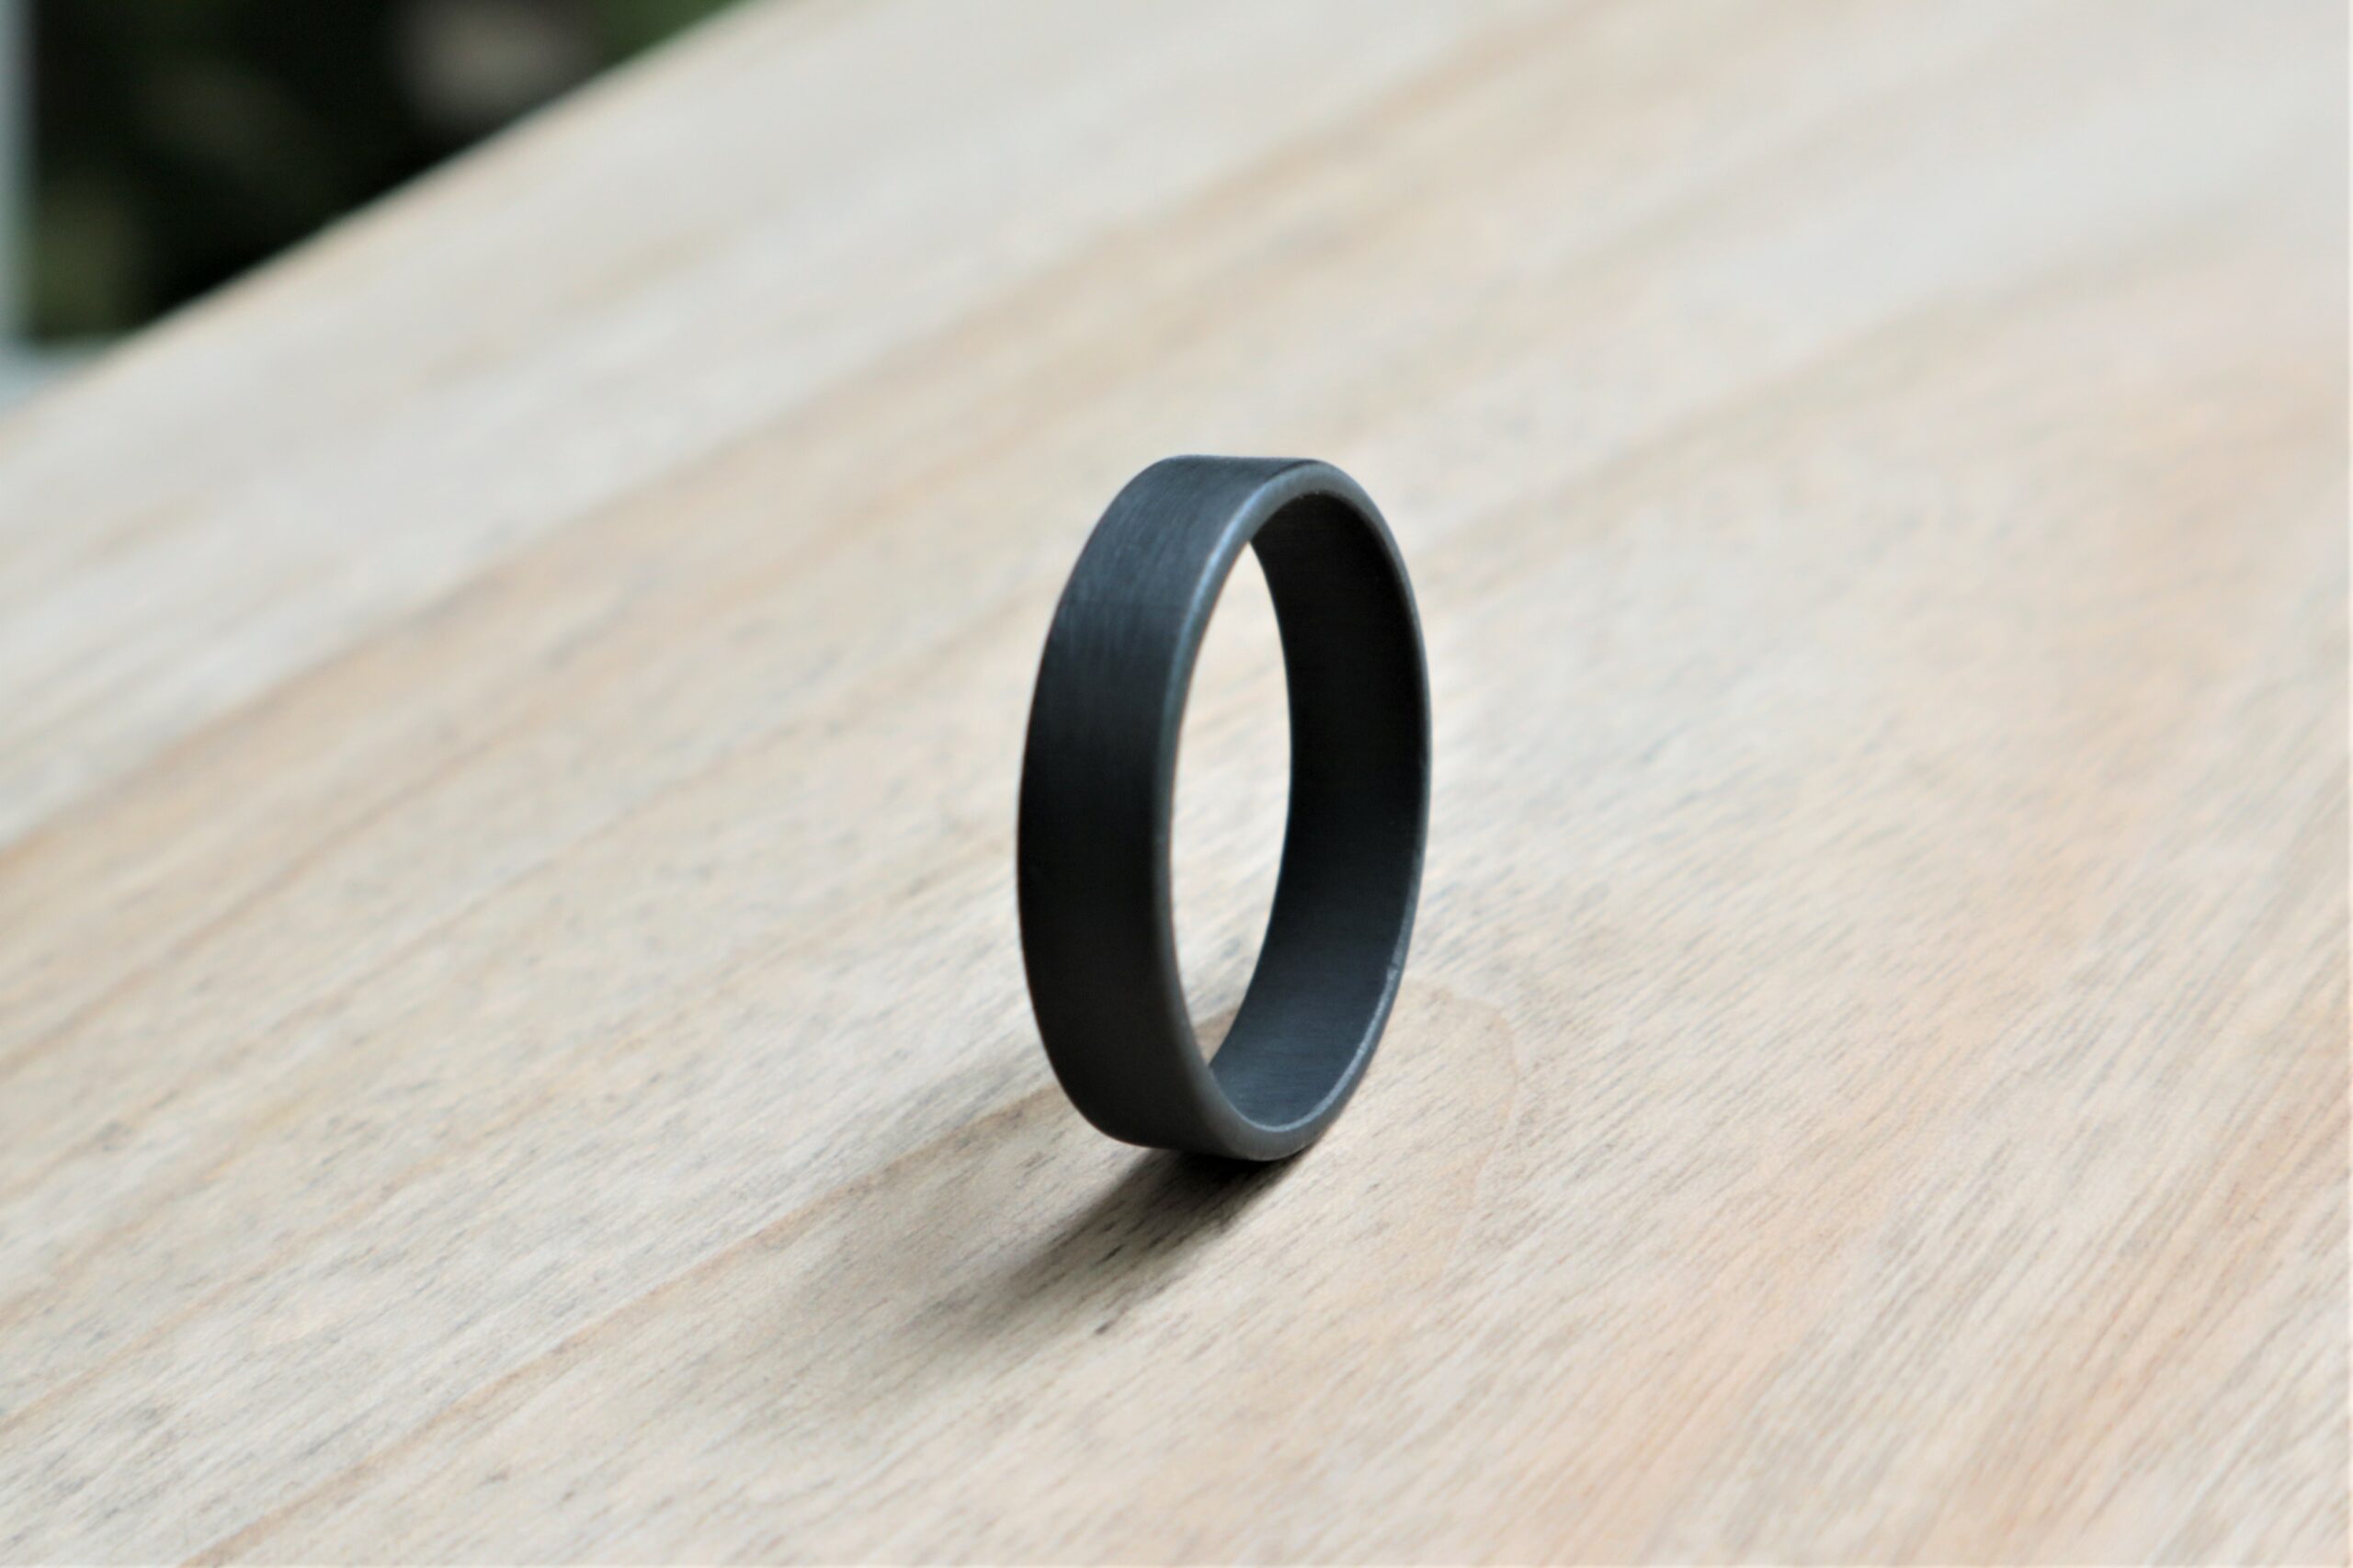 Comfortable low profile Recycled Sterling Silver. Black/Grey Oxidized Sterling Silver Wedding Ring Custom Size Men's 5mm Flat